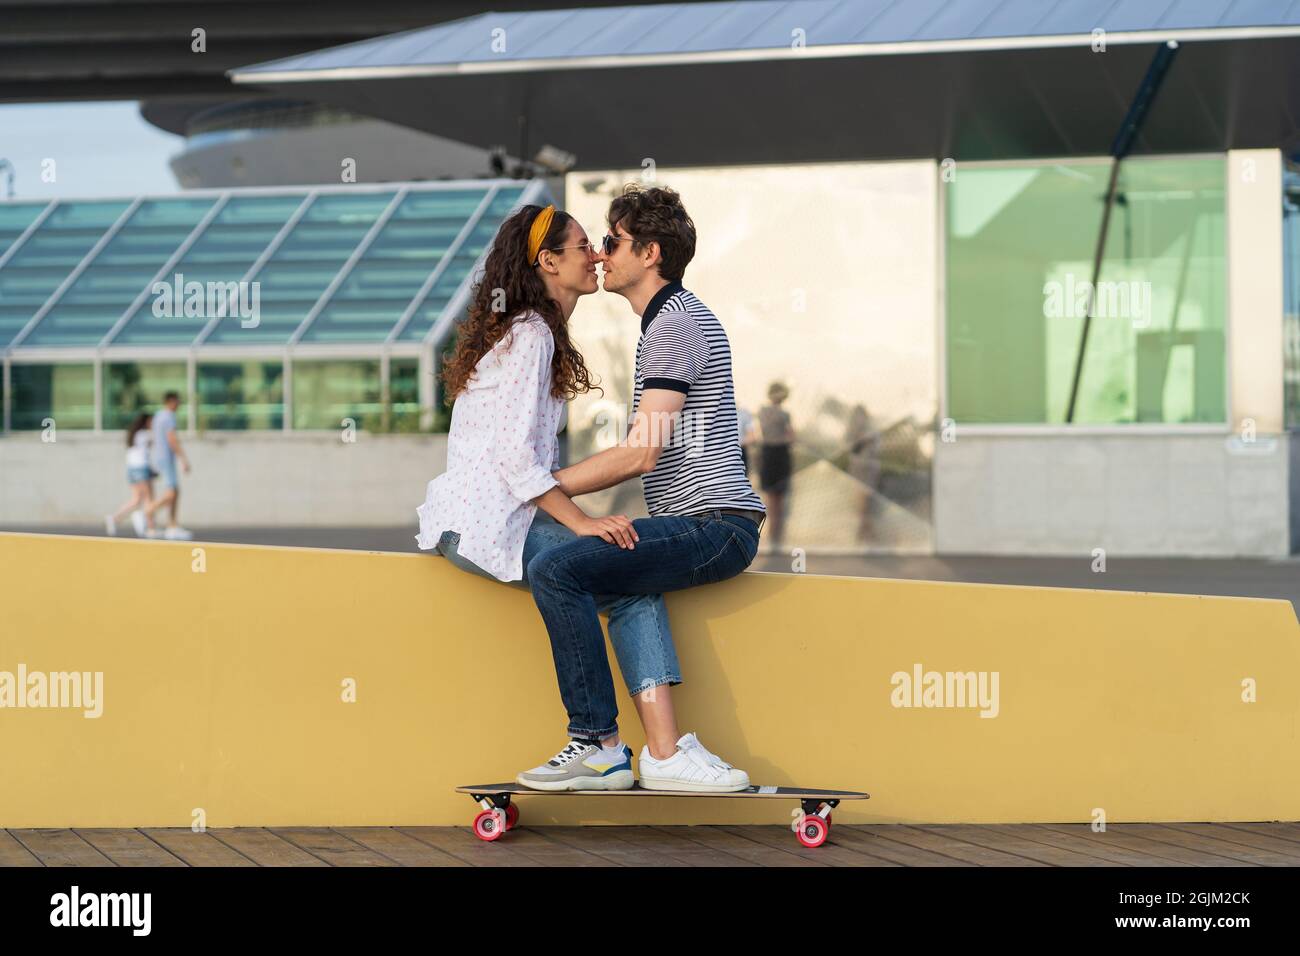 Stylish couple kissing sitting in skatepark. Young cute longboarders man and woman in love cuddling Stock Photo